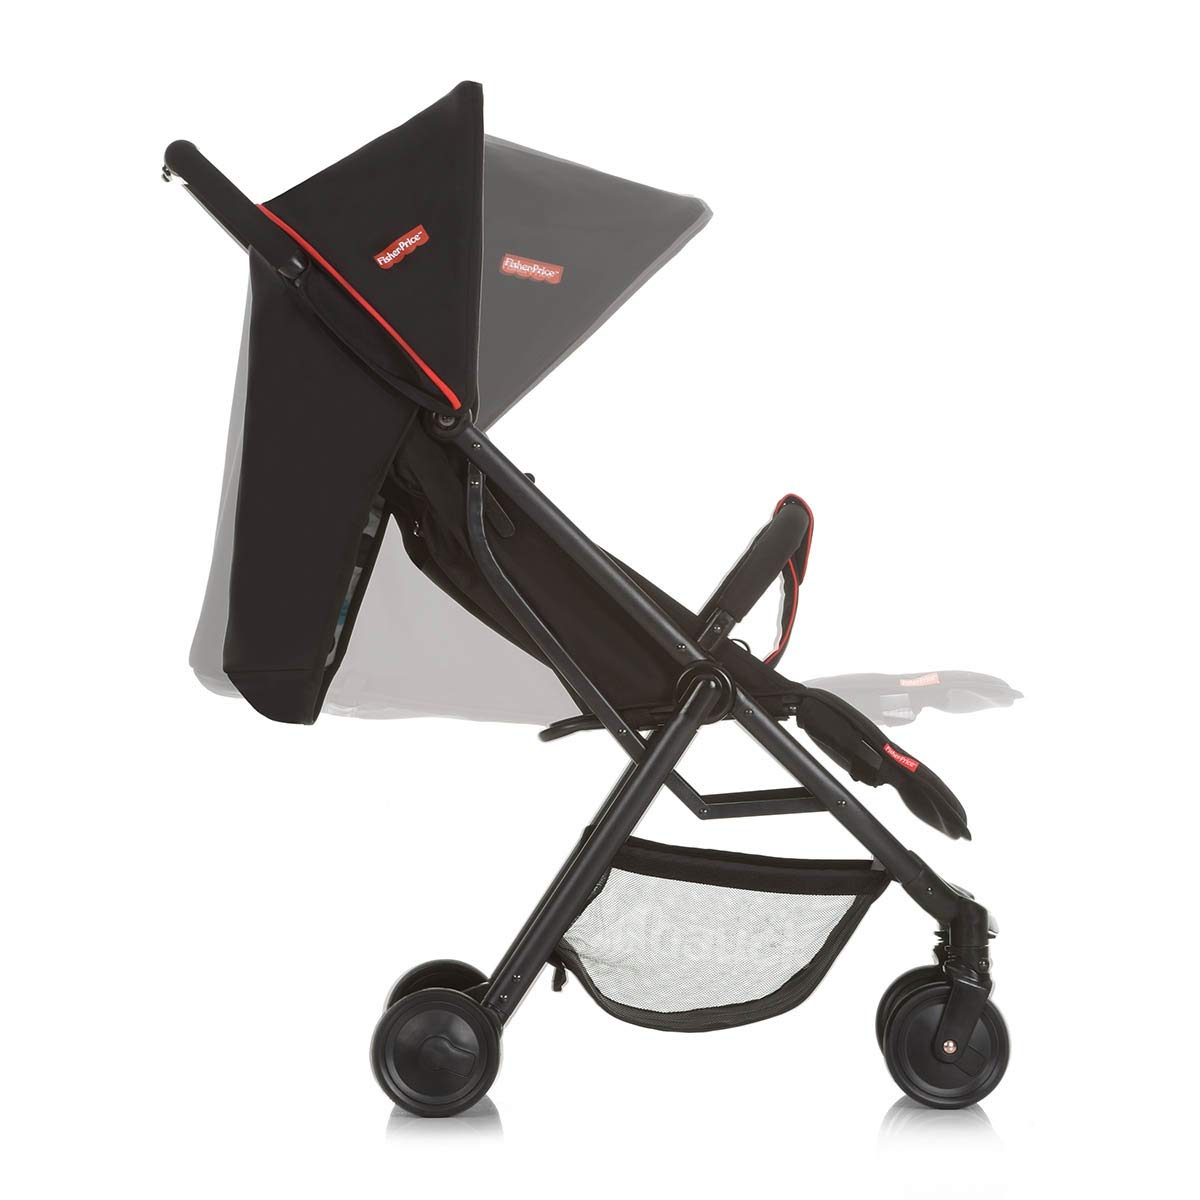 Fisher-Price Rio Plus Buggy Travel Pushchair with Reclining Position and Sun Canopy Can be Folded Small with One Hand Black